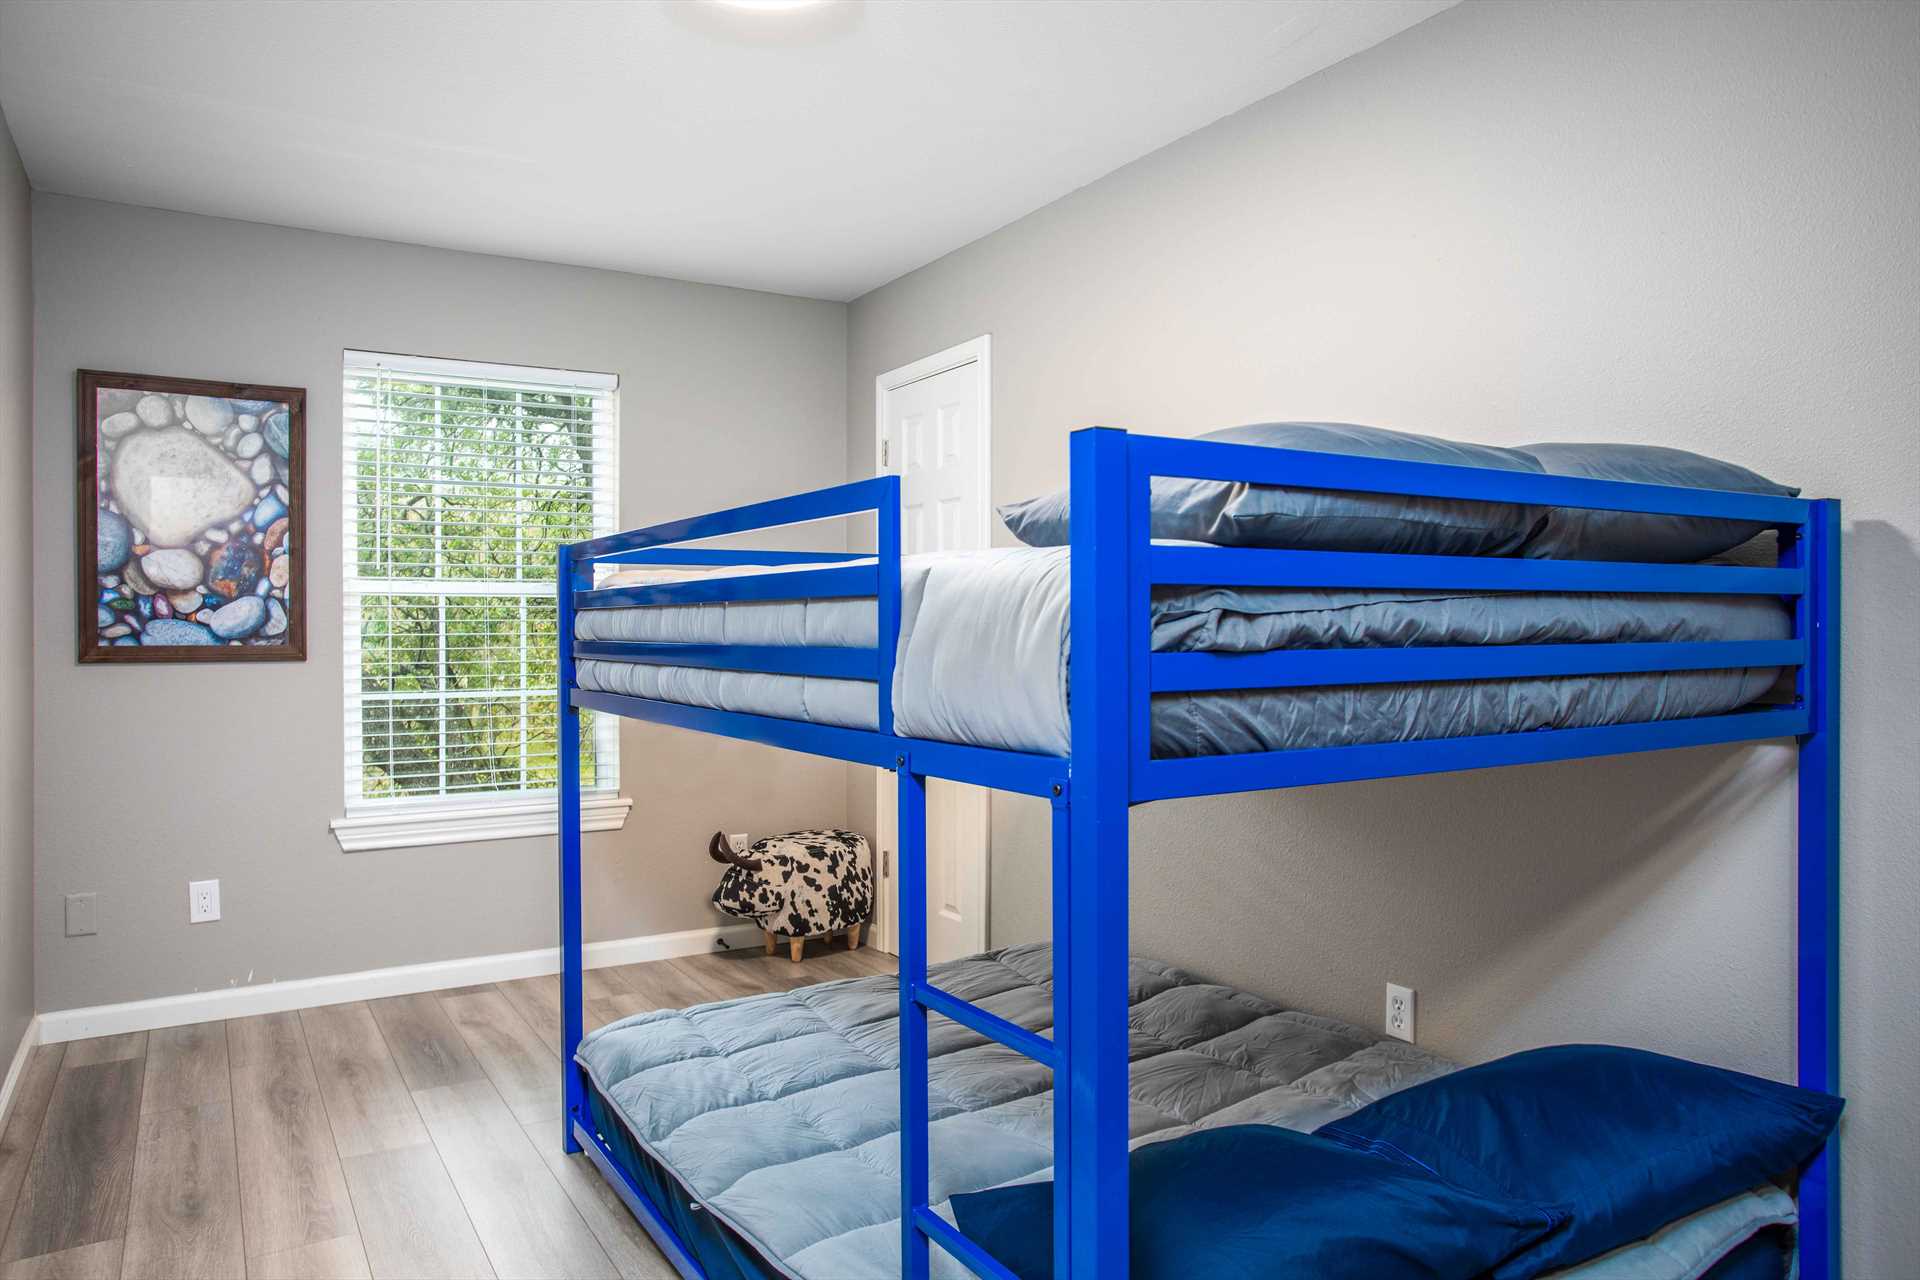                                                 The third bedroom features fun and stylish full-sized bunk beds! Please keep in mind the upper bunk is for kids only.